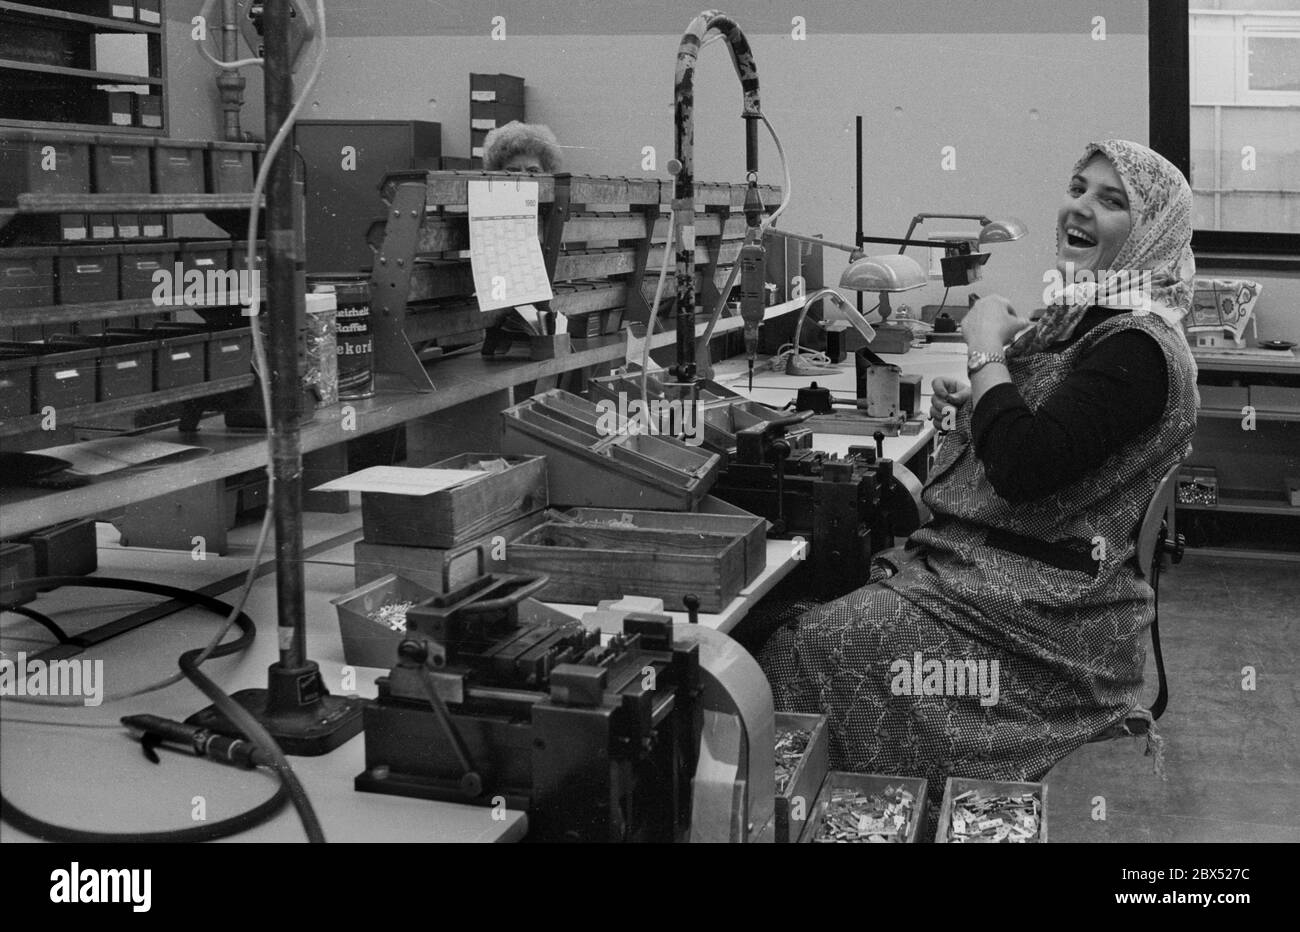 Berlin Districts / Turks / Foreigners 17.10.1980 Kreuzberg: Turkish woman at her workplace.  DeTeWe, Deutsche Telefon-Werke. The company produces switchboards for the post office. The women produce parts in prefabrication. In the next generation of technology these works are done by automatic machines // Women / Work / Industry / History / *** Local Caption *** Foreigners / Turks Turkish woman mounting telephone equipment [automated translation] Stock Photo